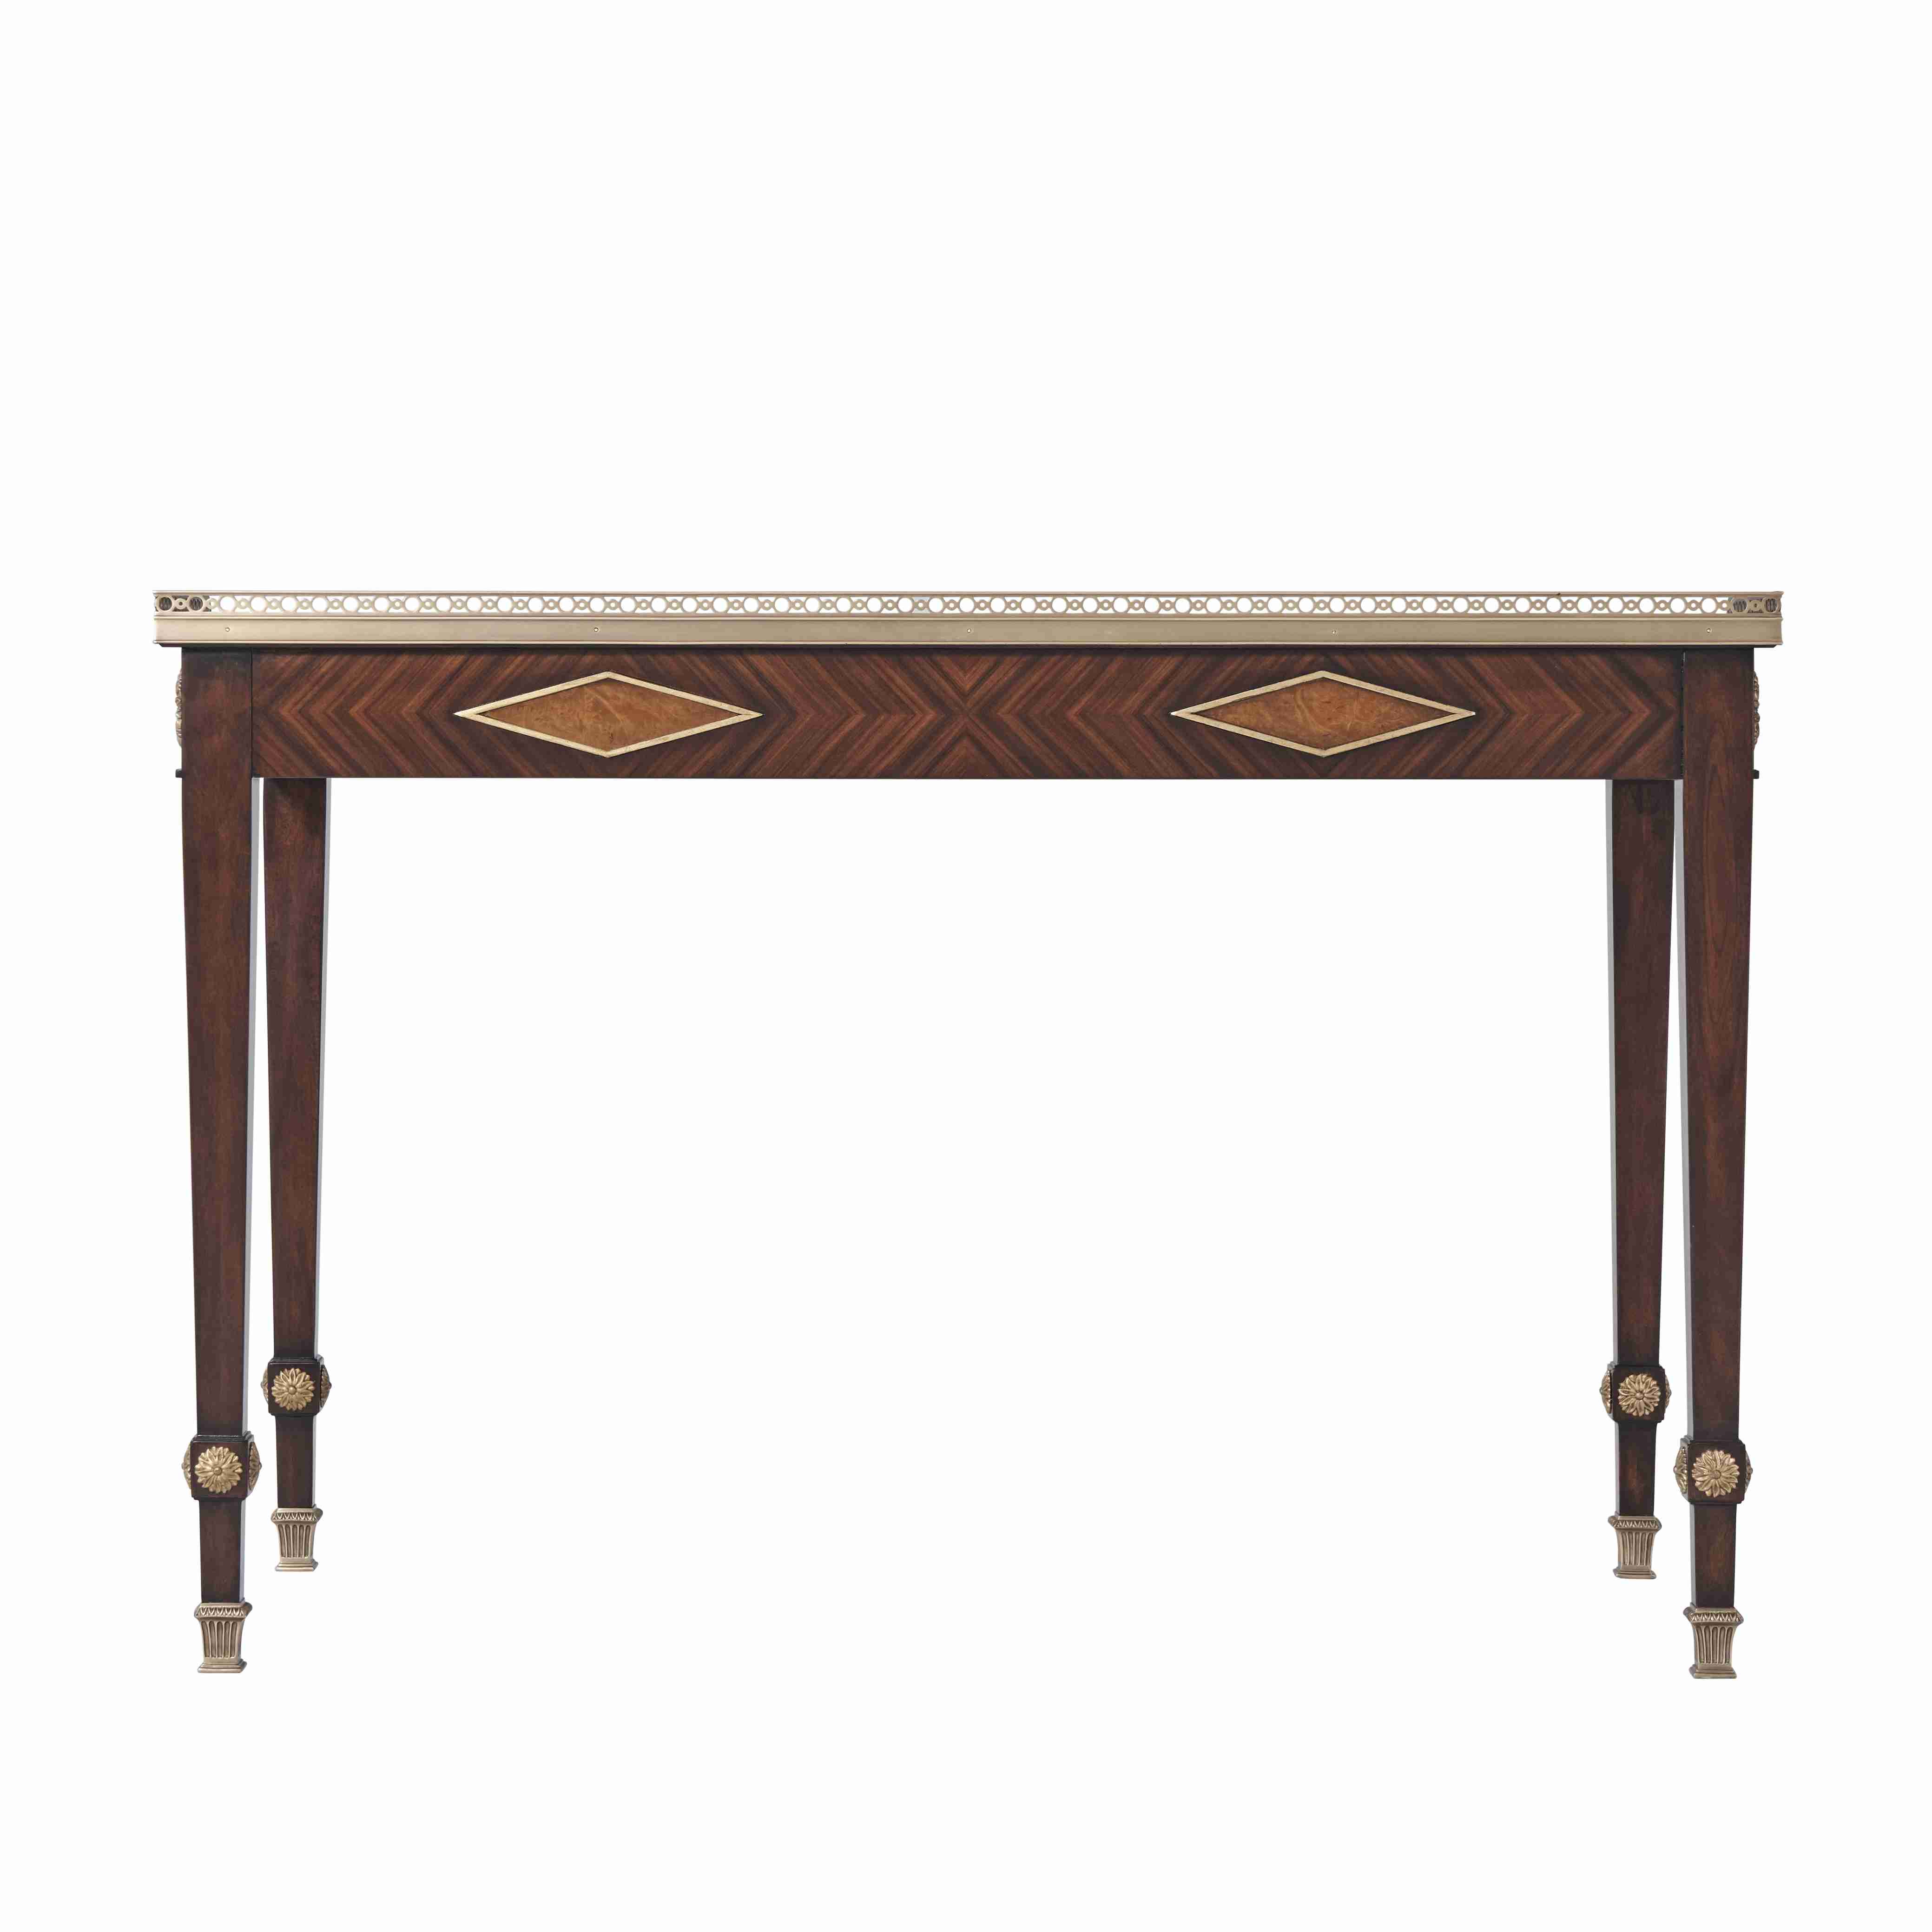 SOUTH DRAWING ROOM DESK